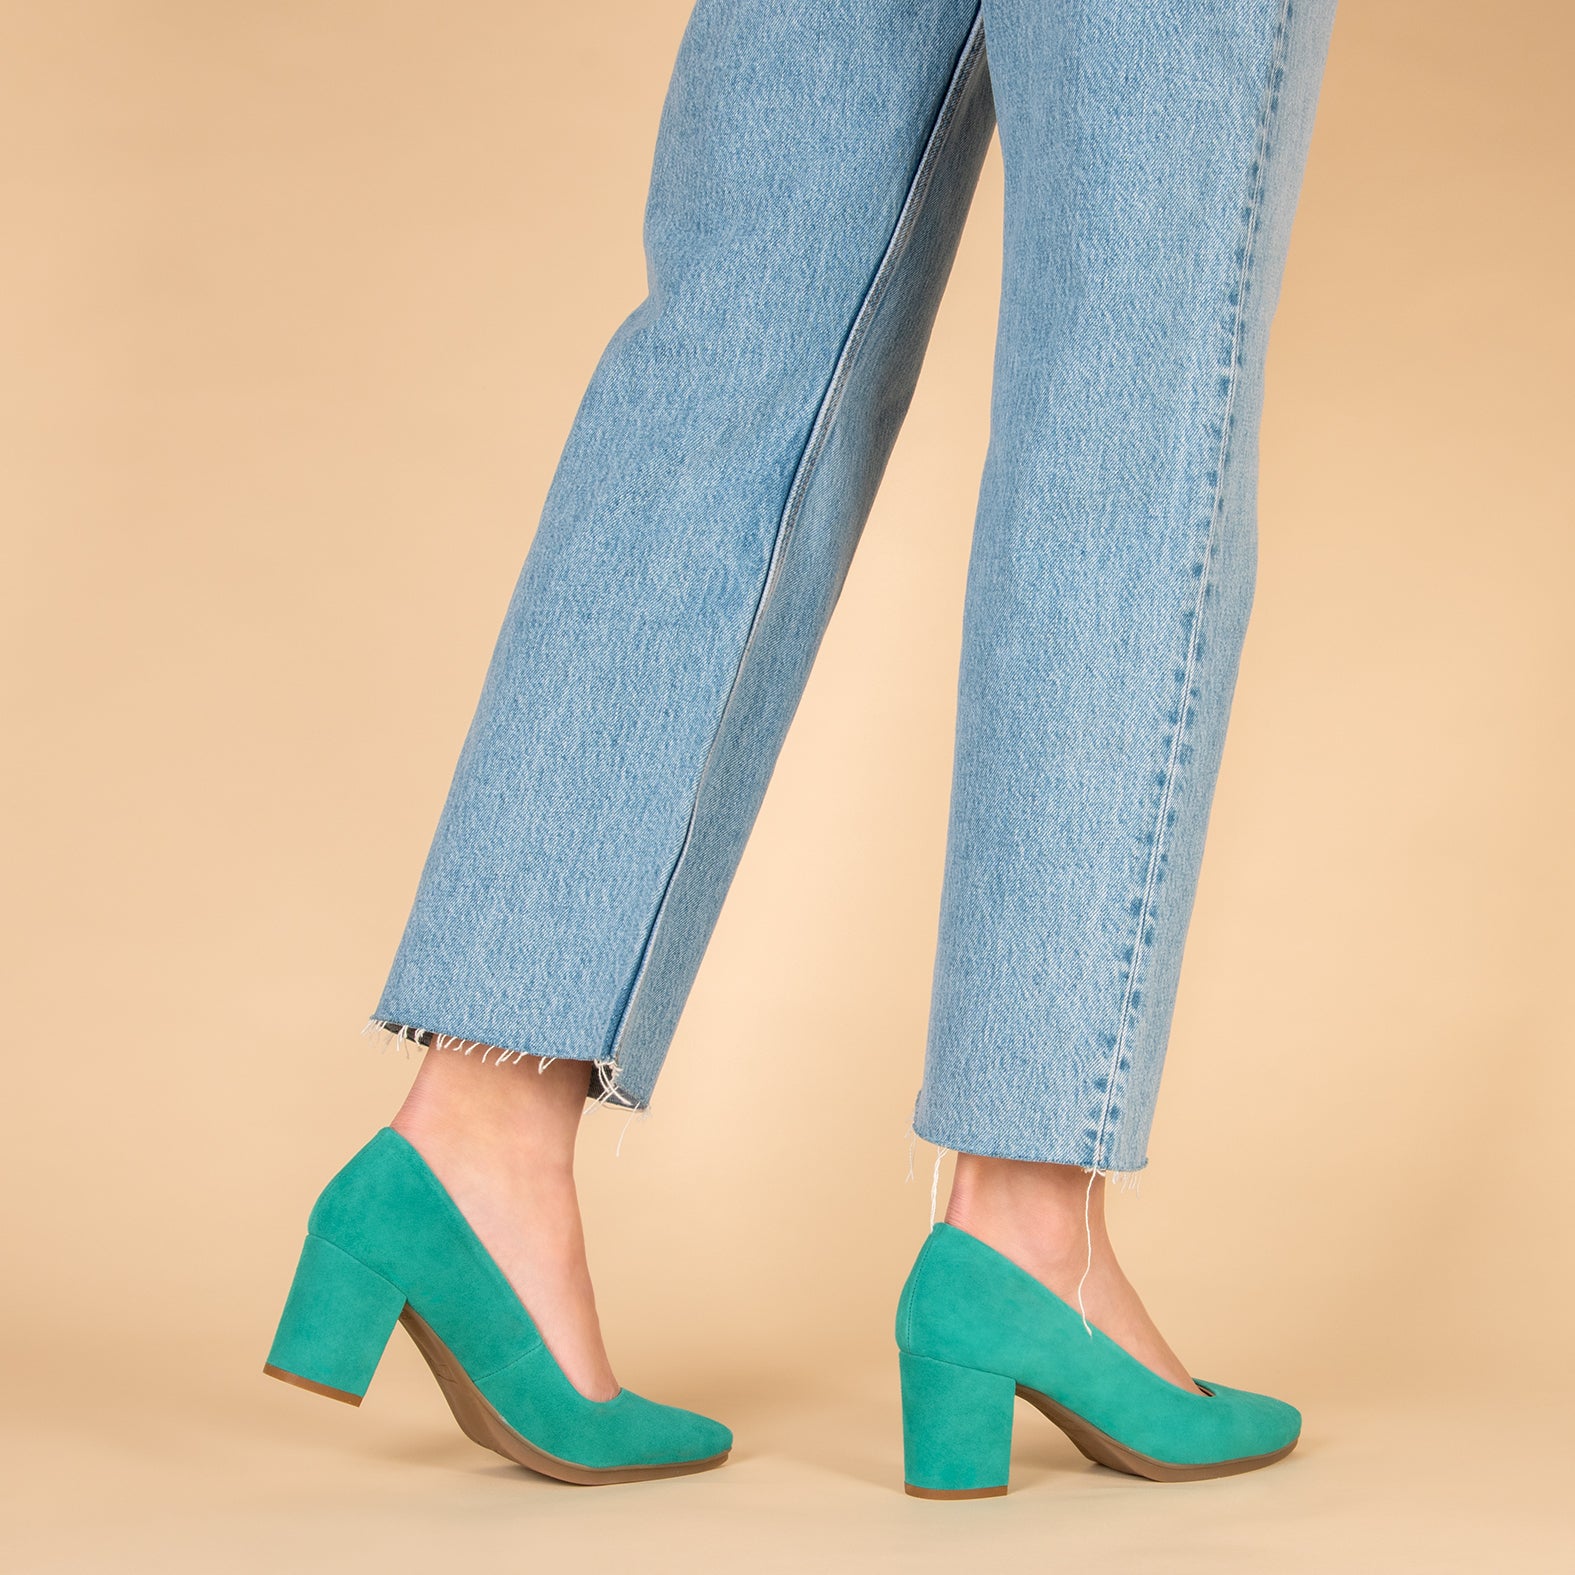 URBAN S – TURQUOISE Suede Mid-Heeled Shoes 